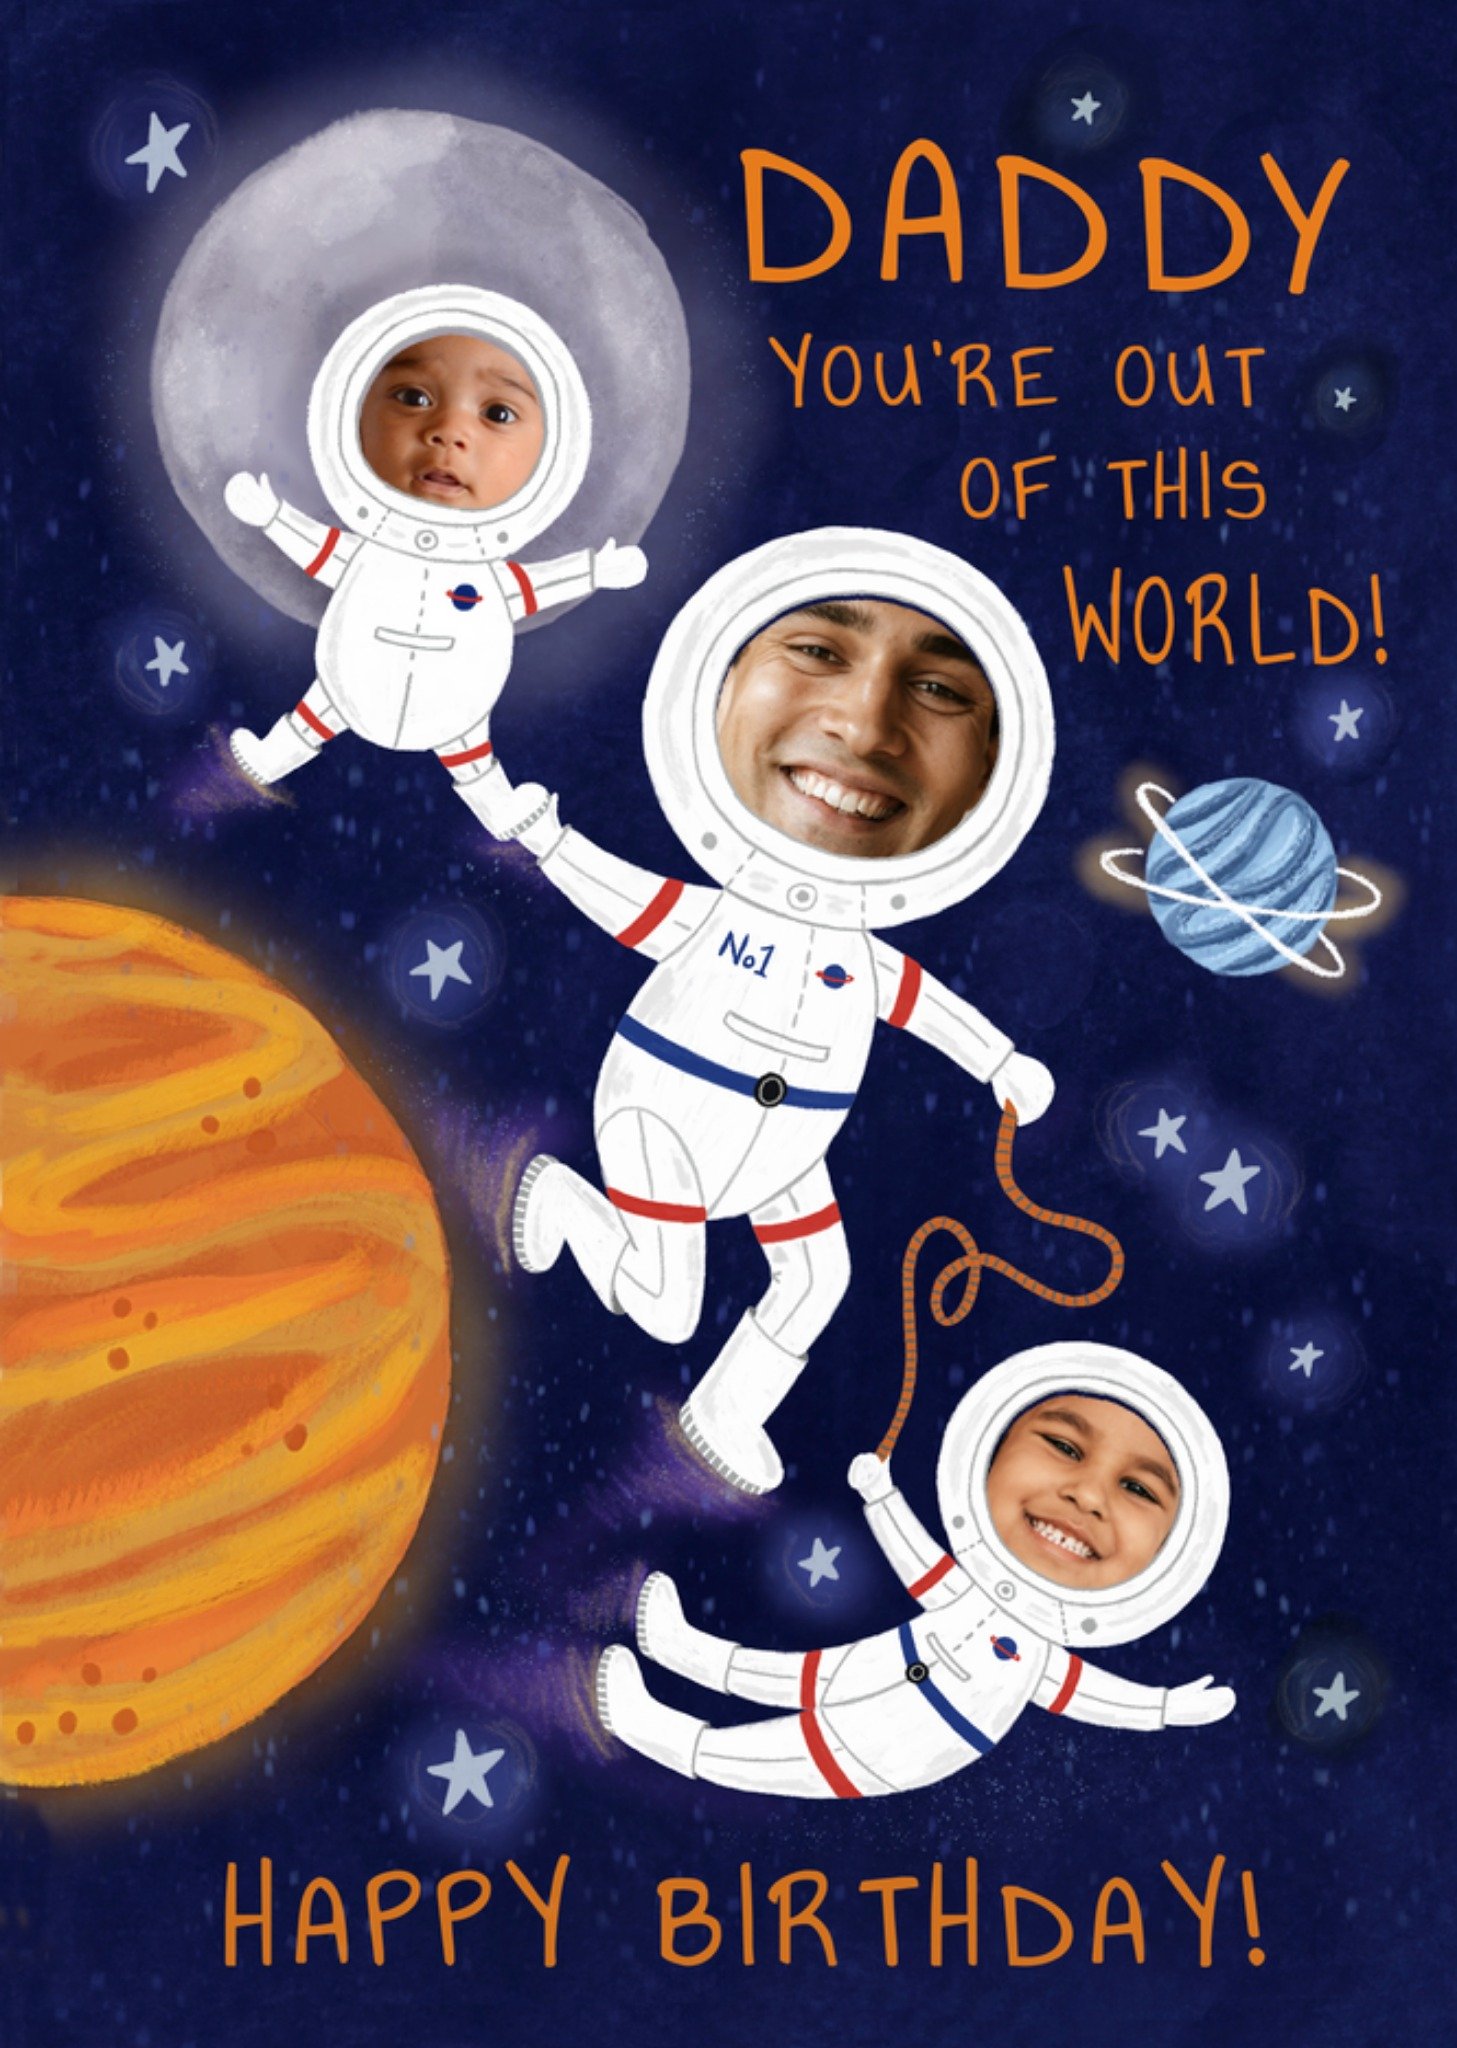 Moonpig Fun Daddy You Are Out Of This World Illustrated Astronauts In Space Photo Upload Birthday Ca